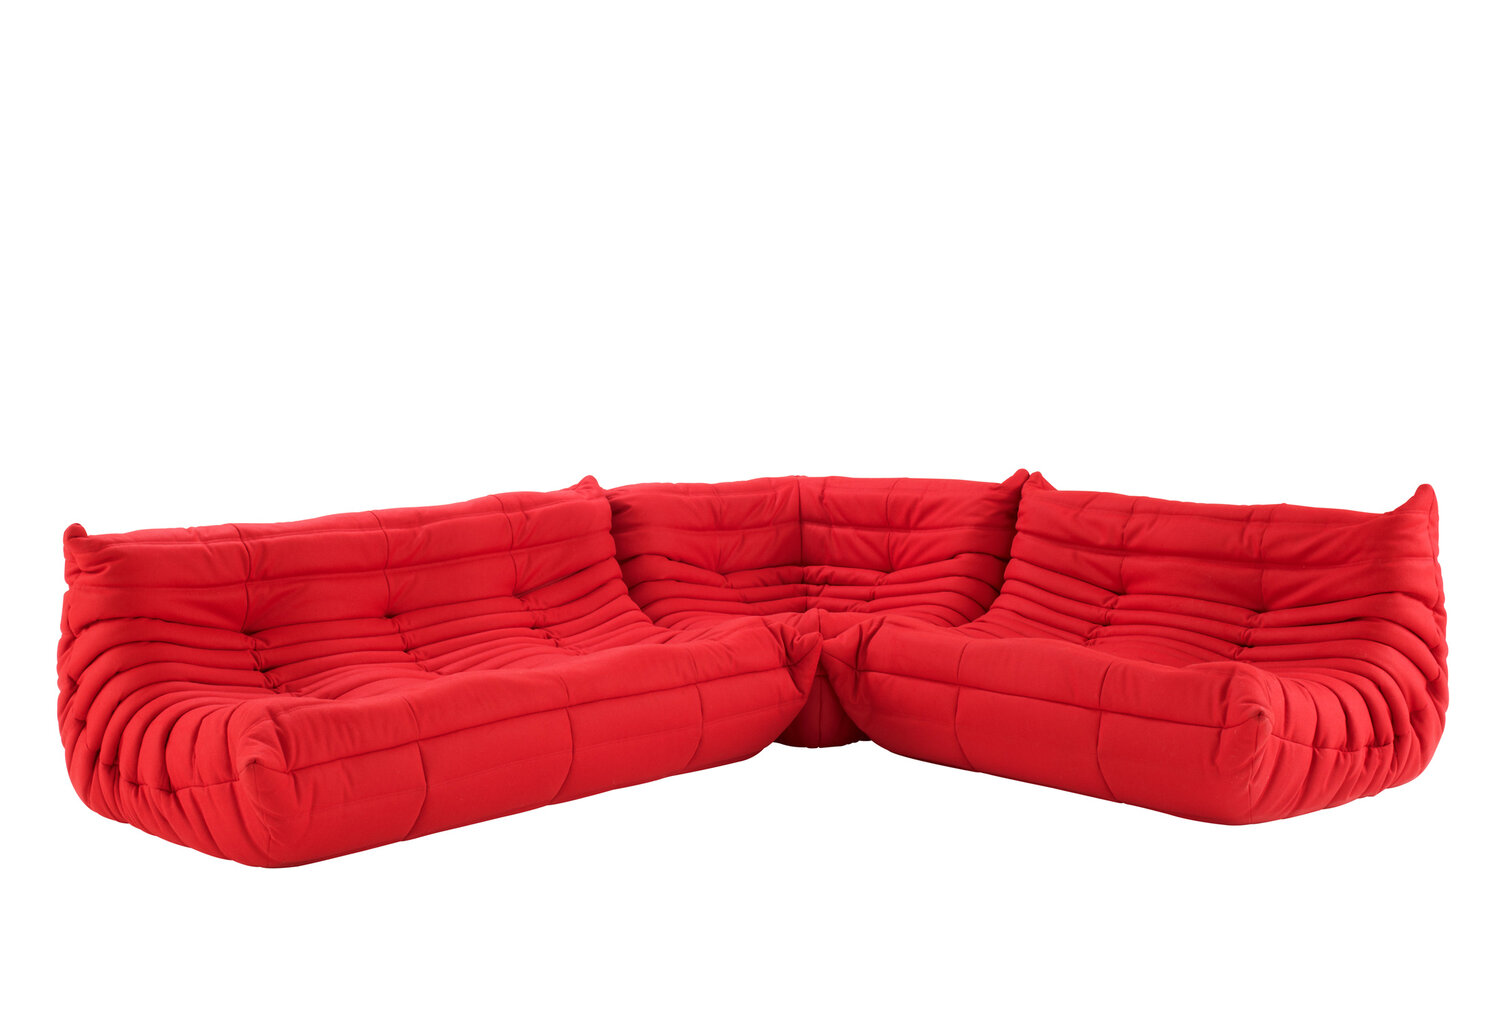 Bomboca Sofa By Campana Brothers Other - Home R96625